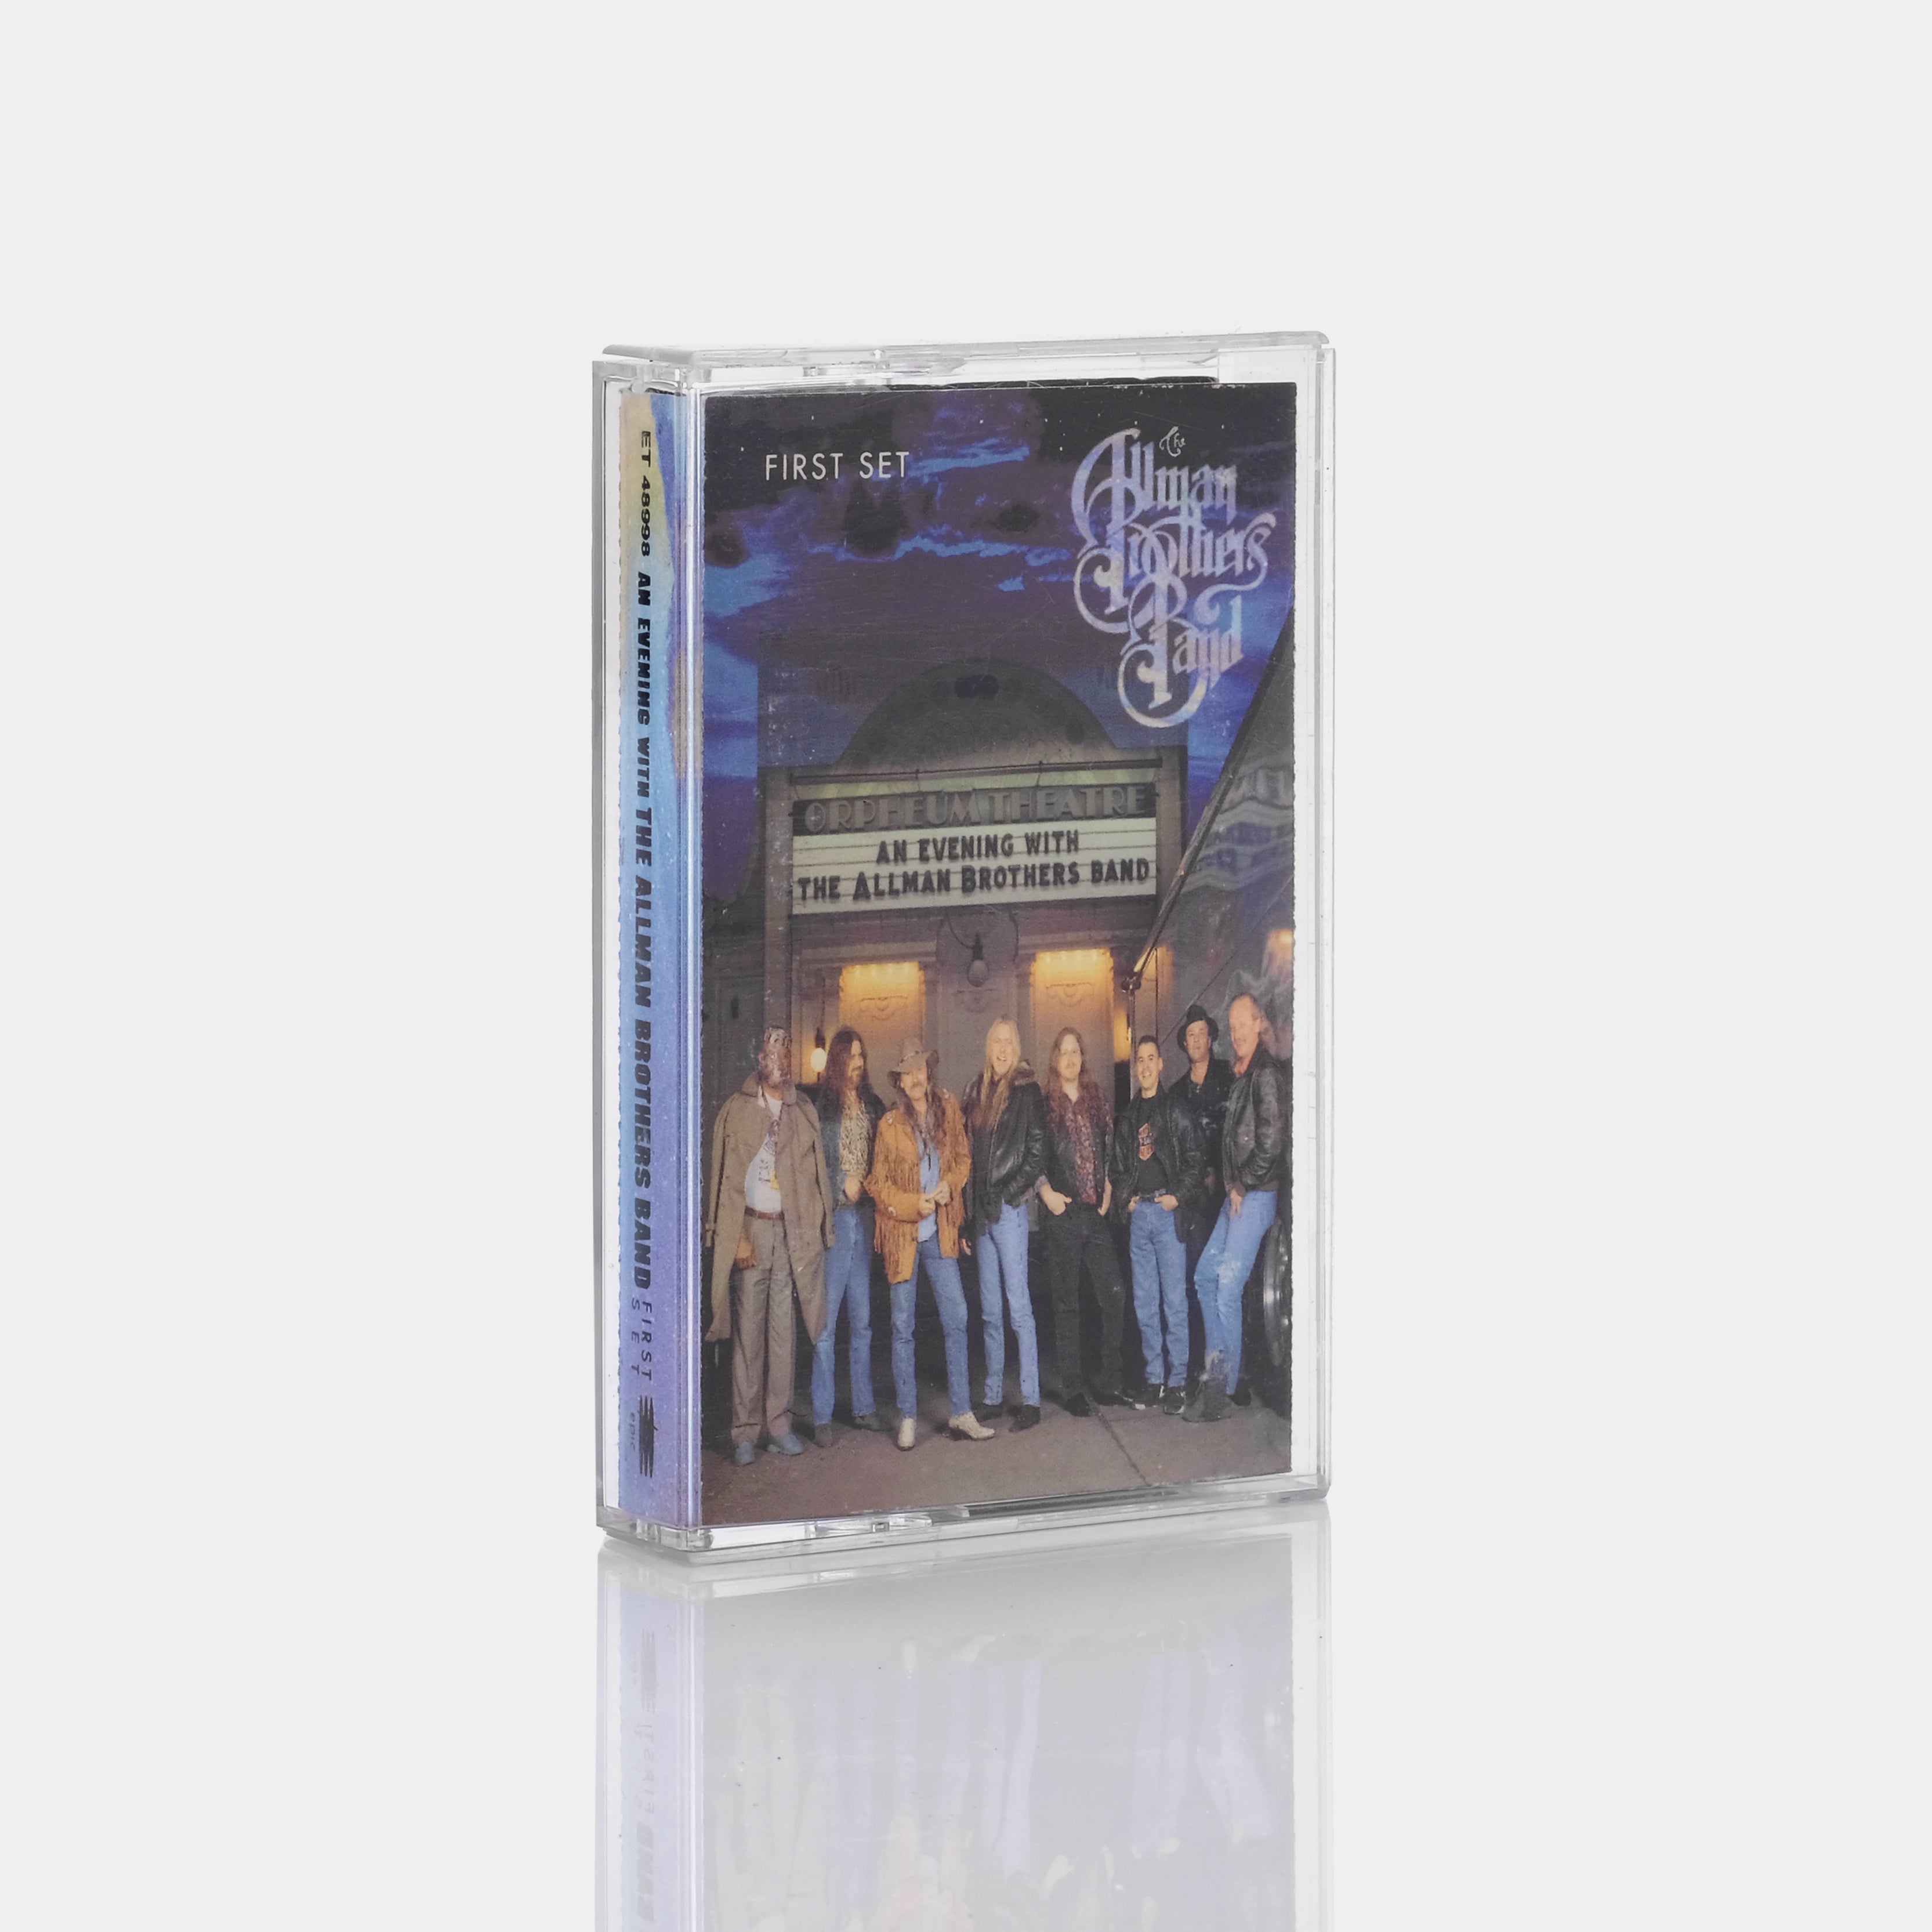 The Allman Brothers Band - An Evening With The Allman Brothers Band: First Set Cassette Tape